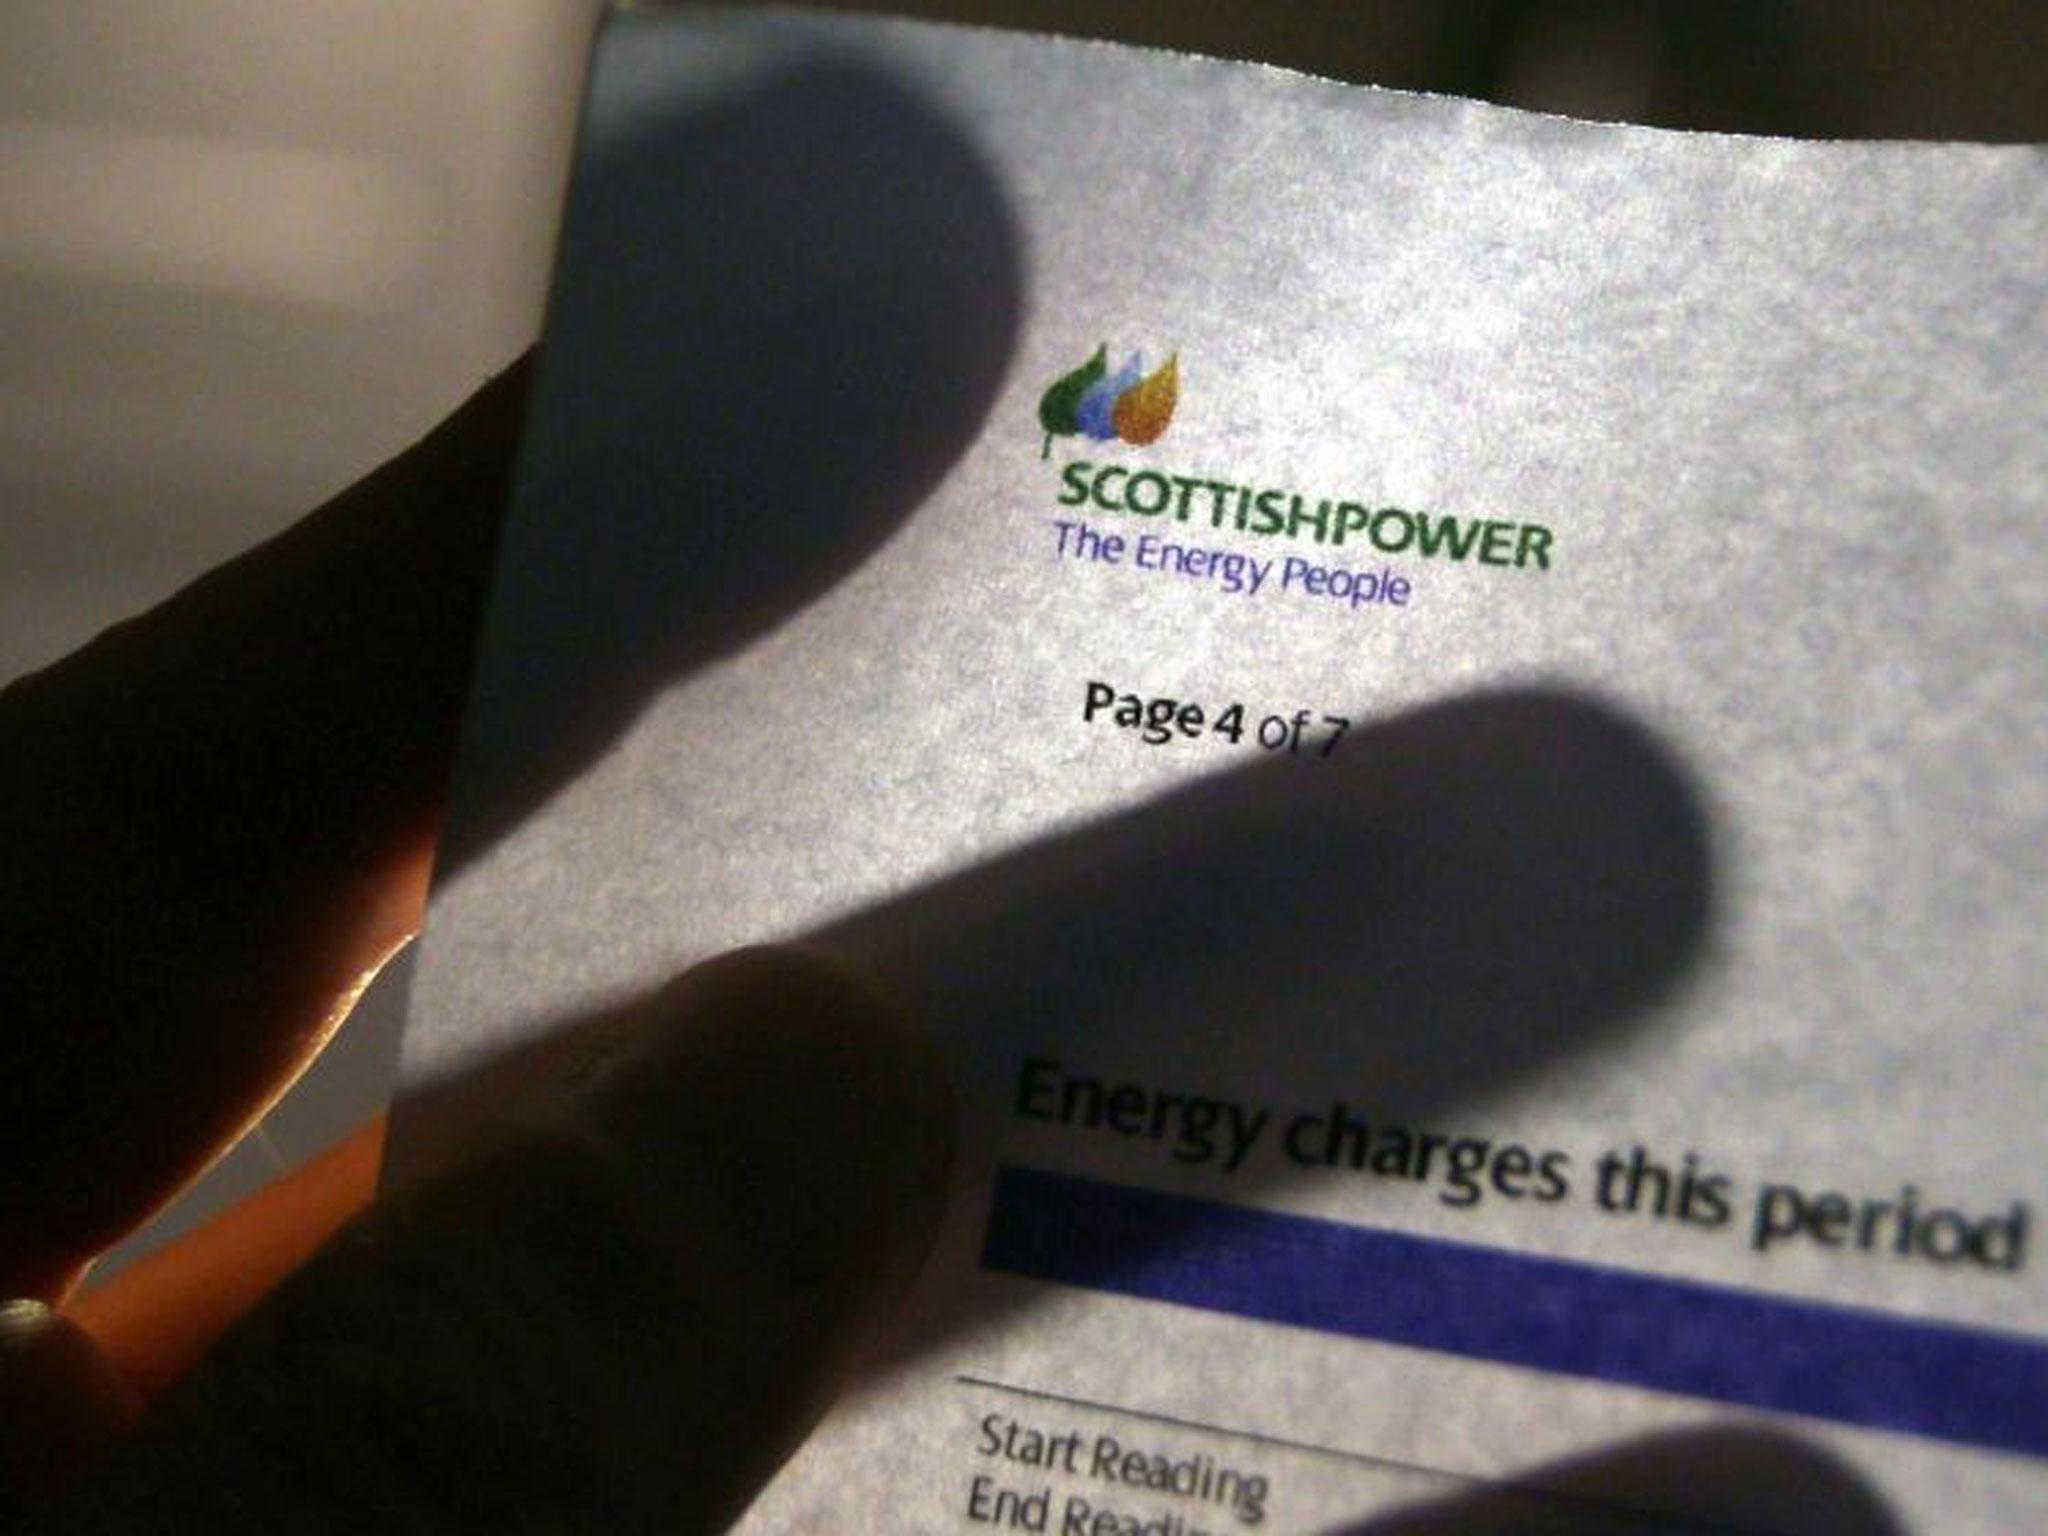 Scottish Power blamed the increase on rising wholesale gas and electricity prices compulsory costs such as upgrading meters